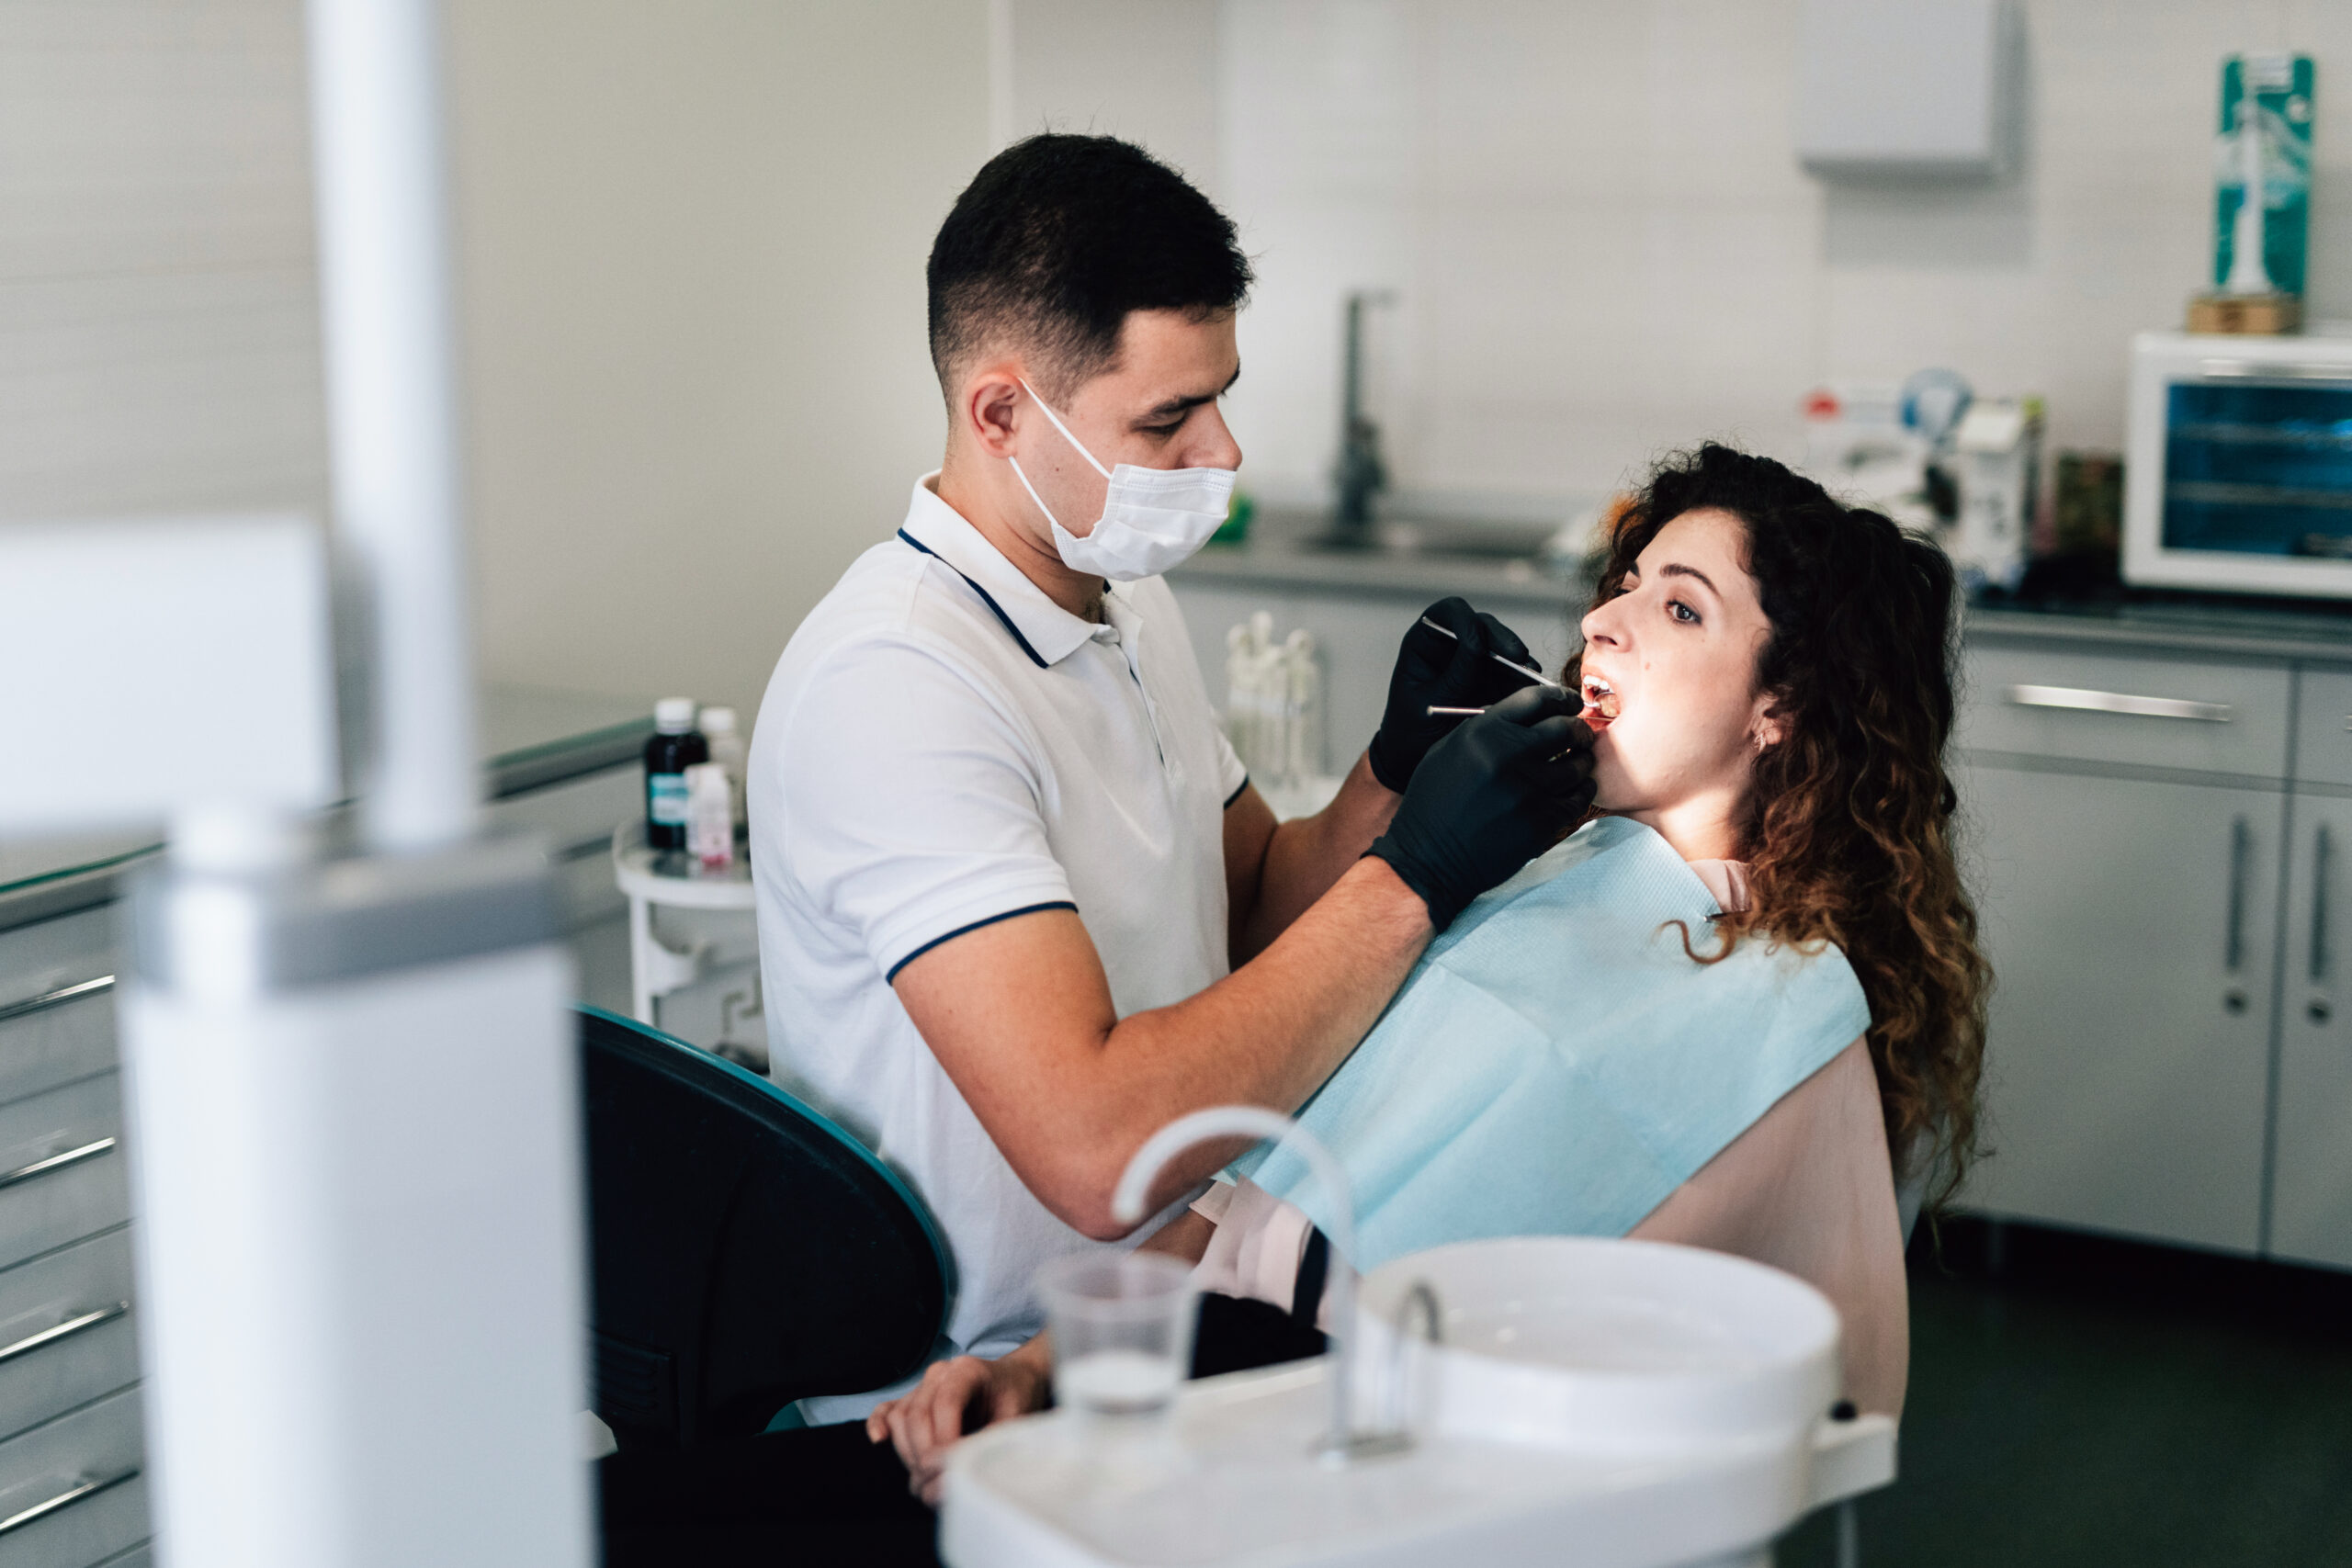 dentist regularly for cleanings